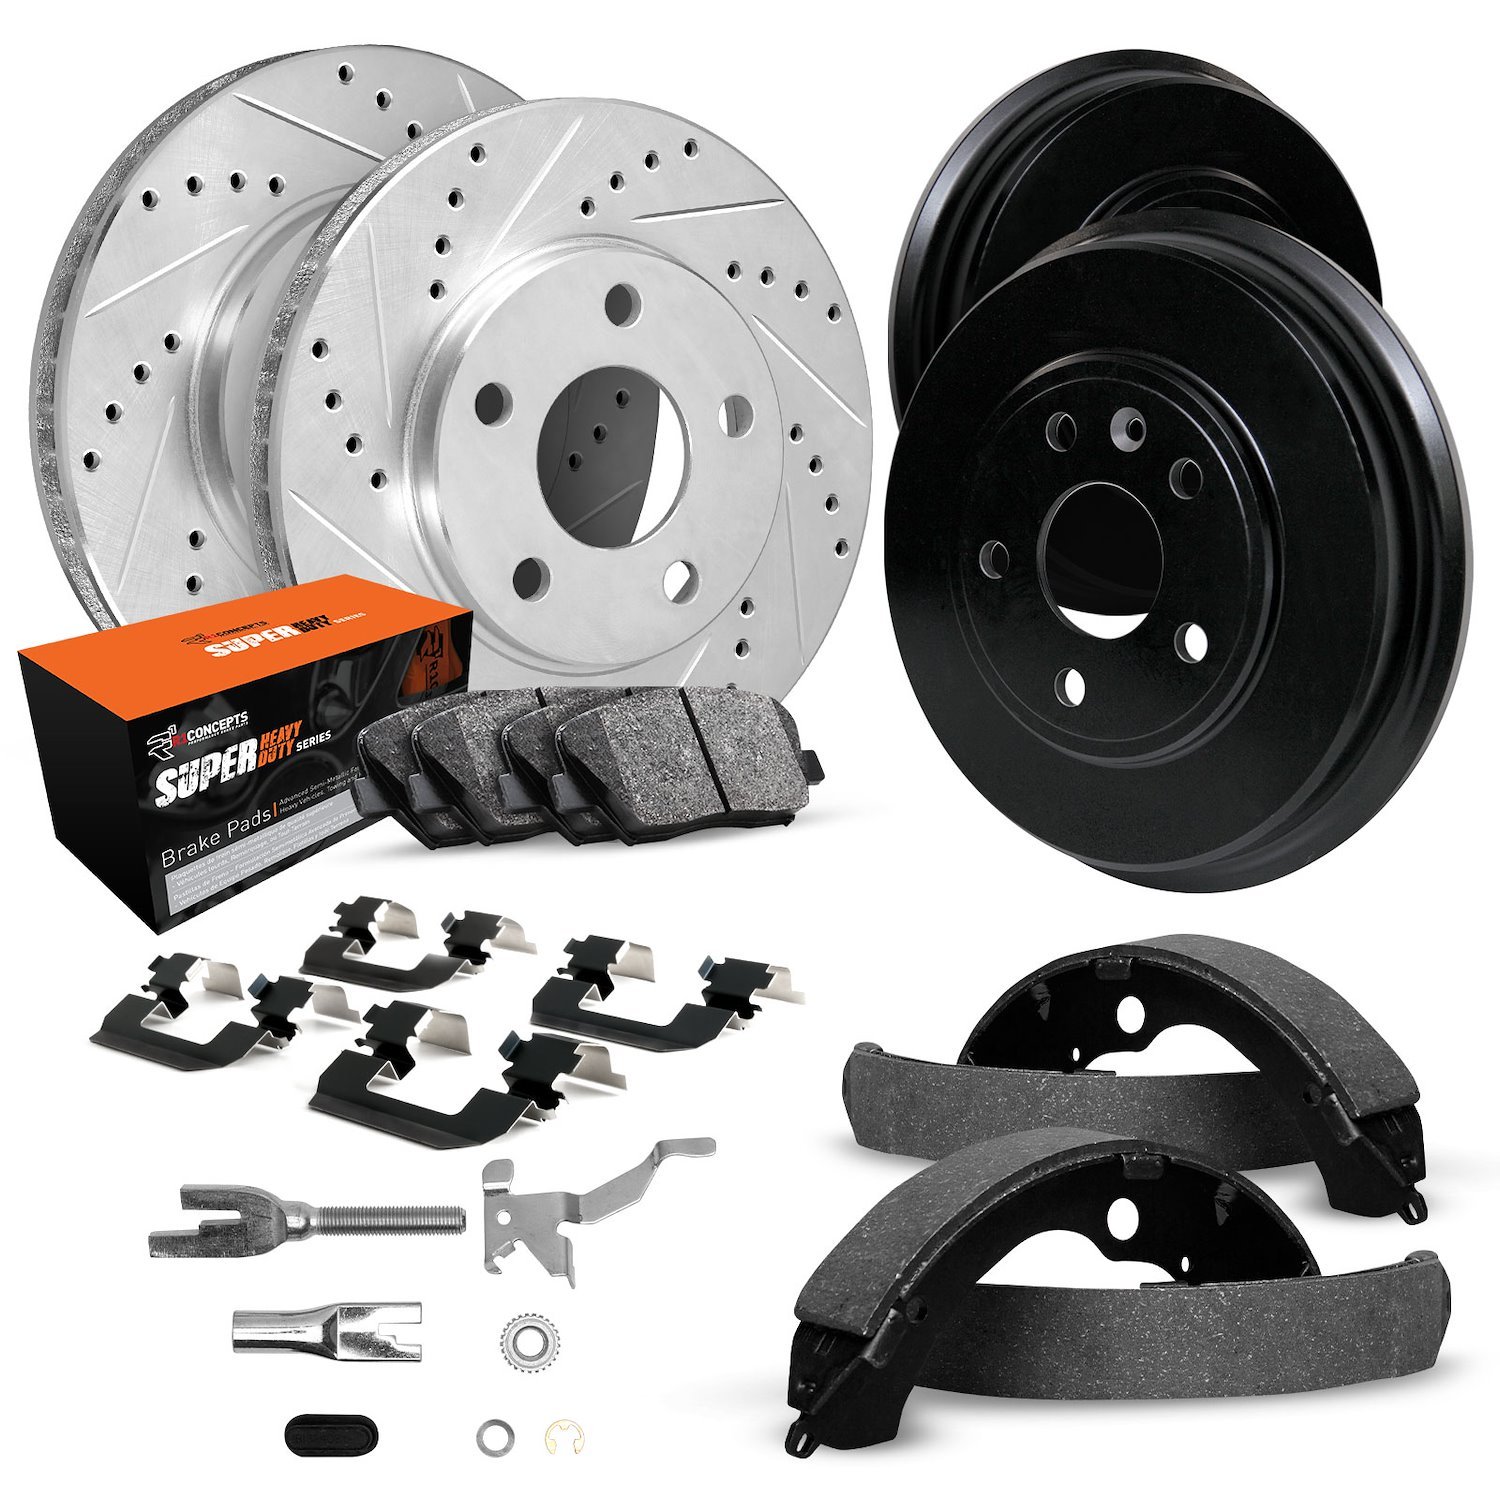 E-Line Drilled/Slotted Silver Rotor & Drum Set w/Super-Duty Pads, Shoes/Hardware/Adjusters, 1999-2006 Mopar